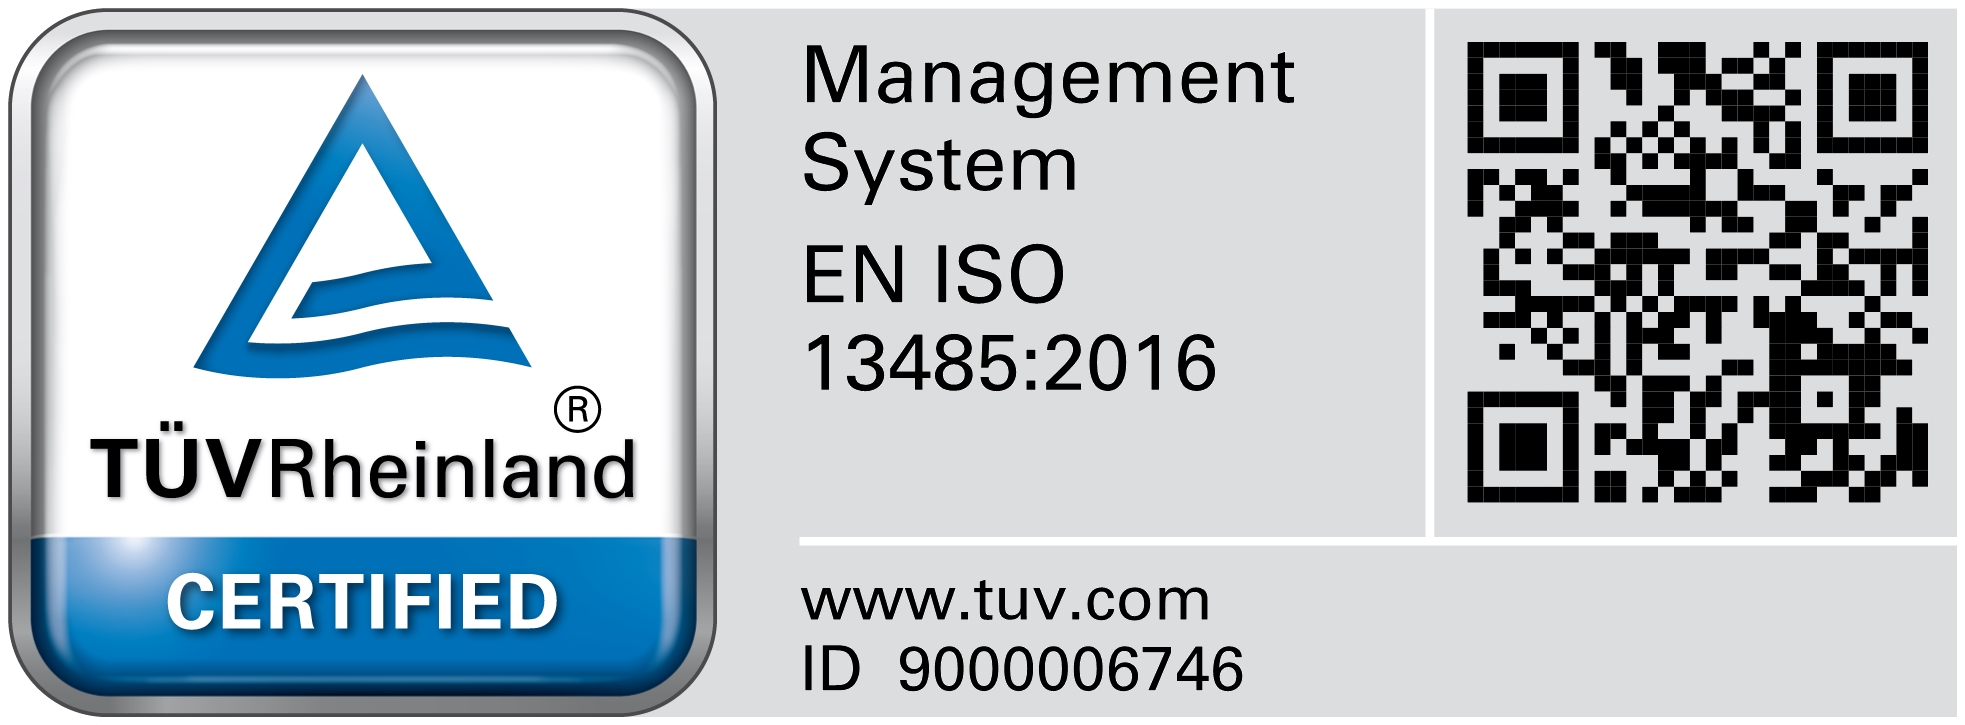 ISO 9001:2008 ISO 13485:2003 Management System